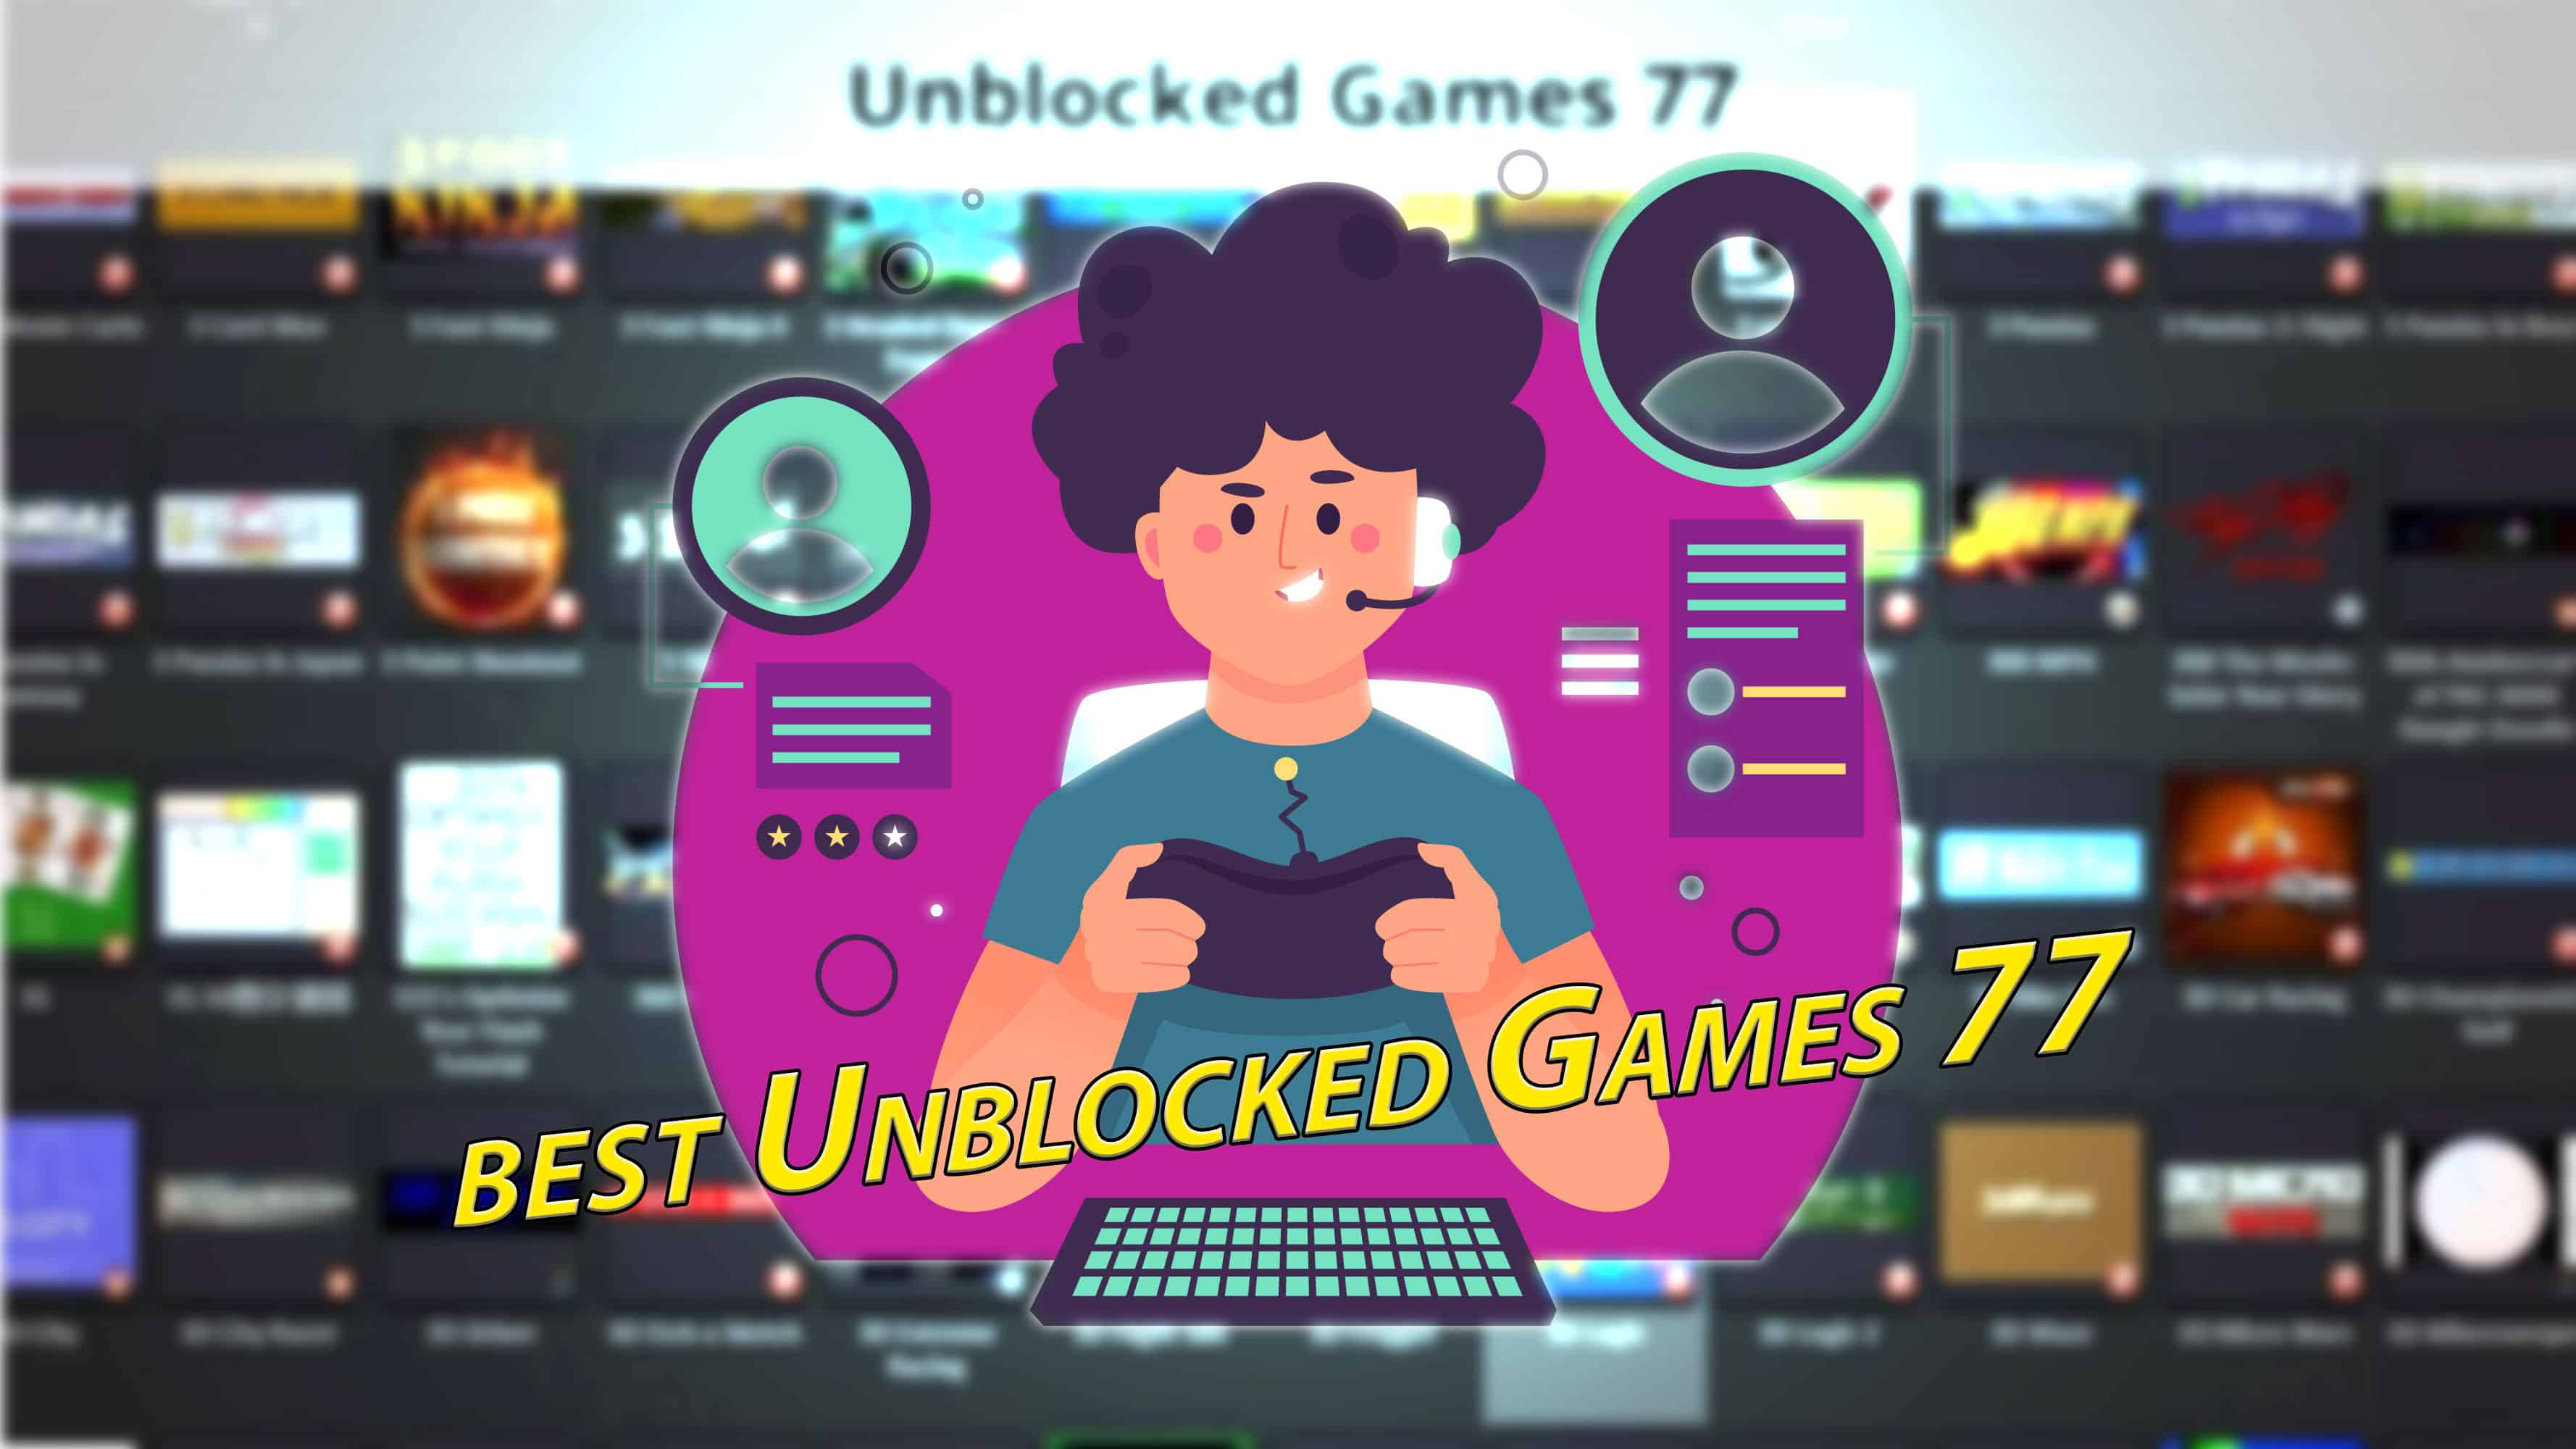 10 best Unblocked Games 77 – The Best Place to Play Browser-Based Games Unblocked